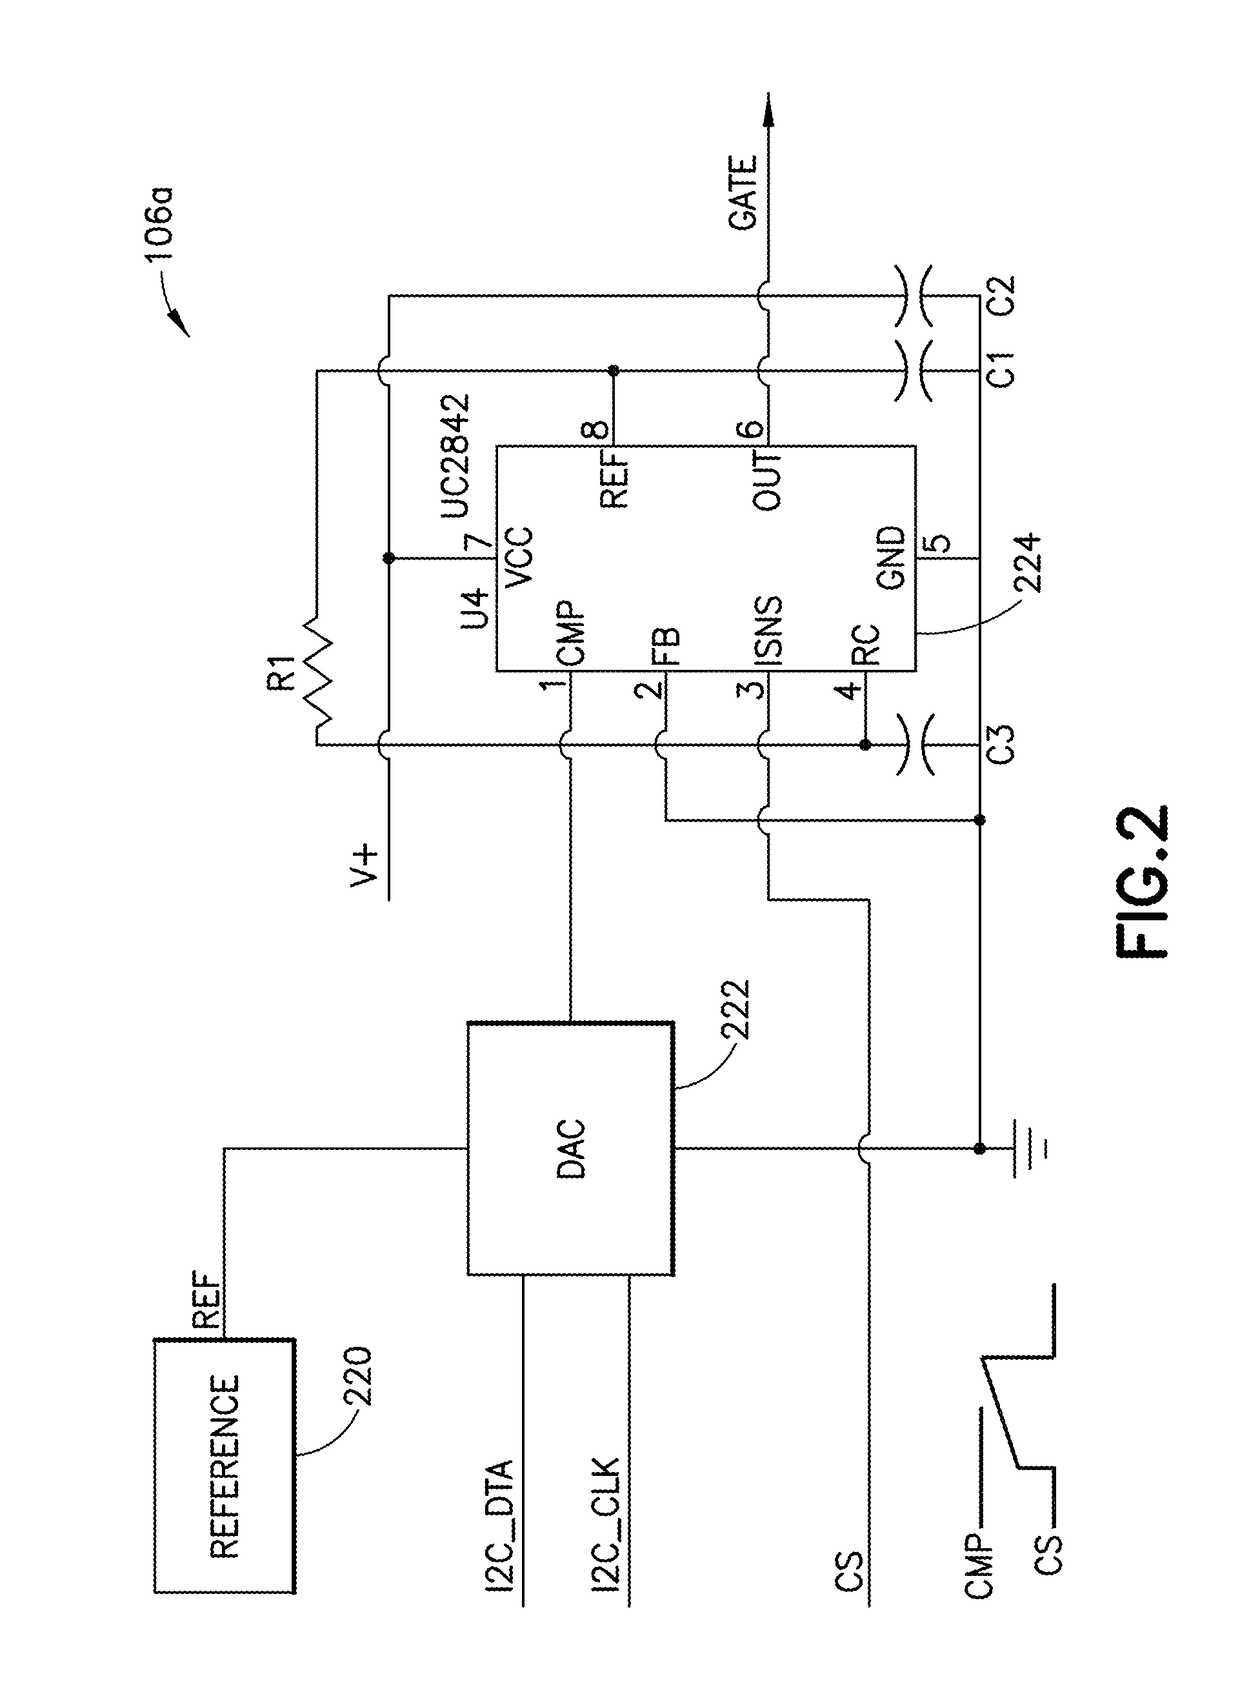 Load sharing between parallel connected power converters